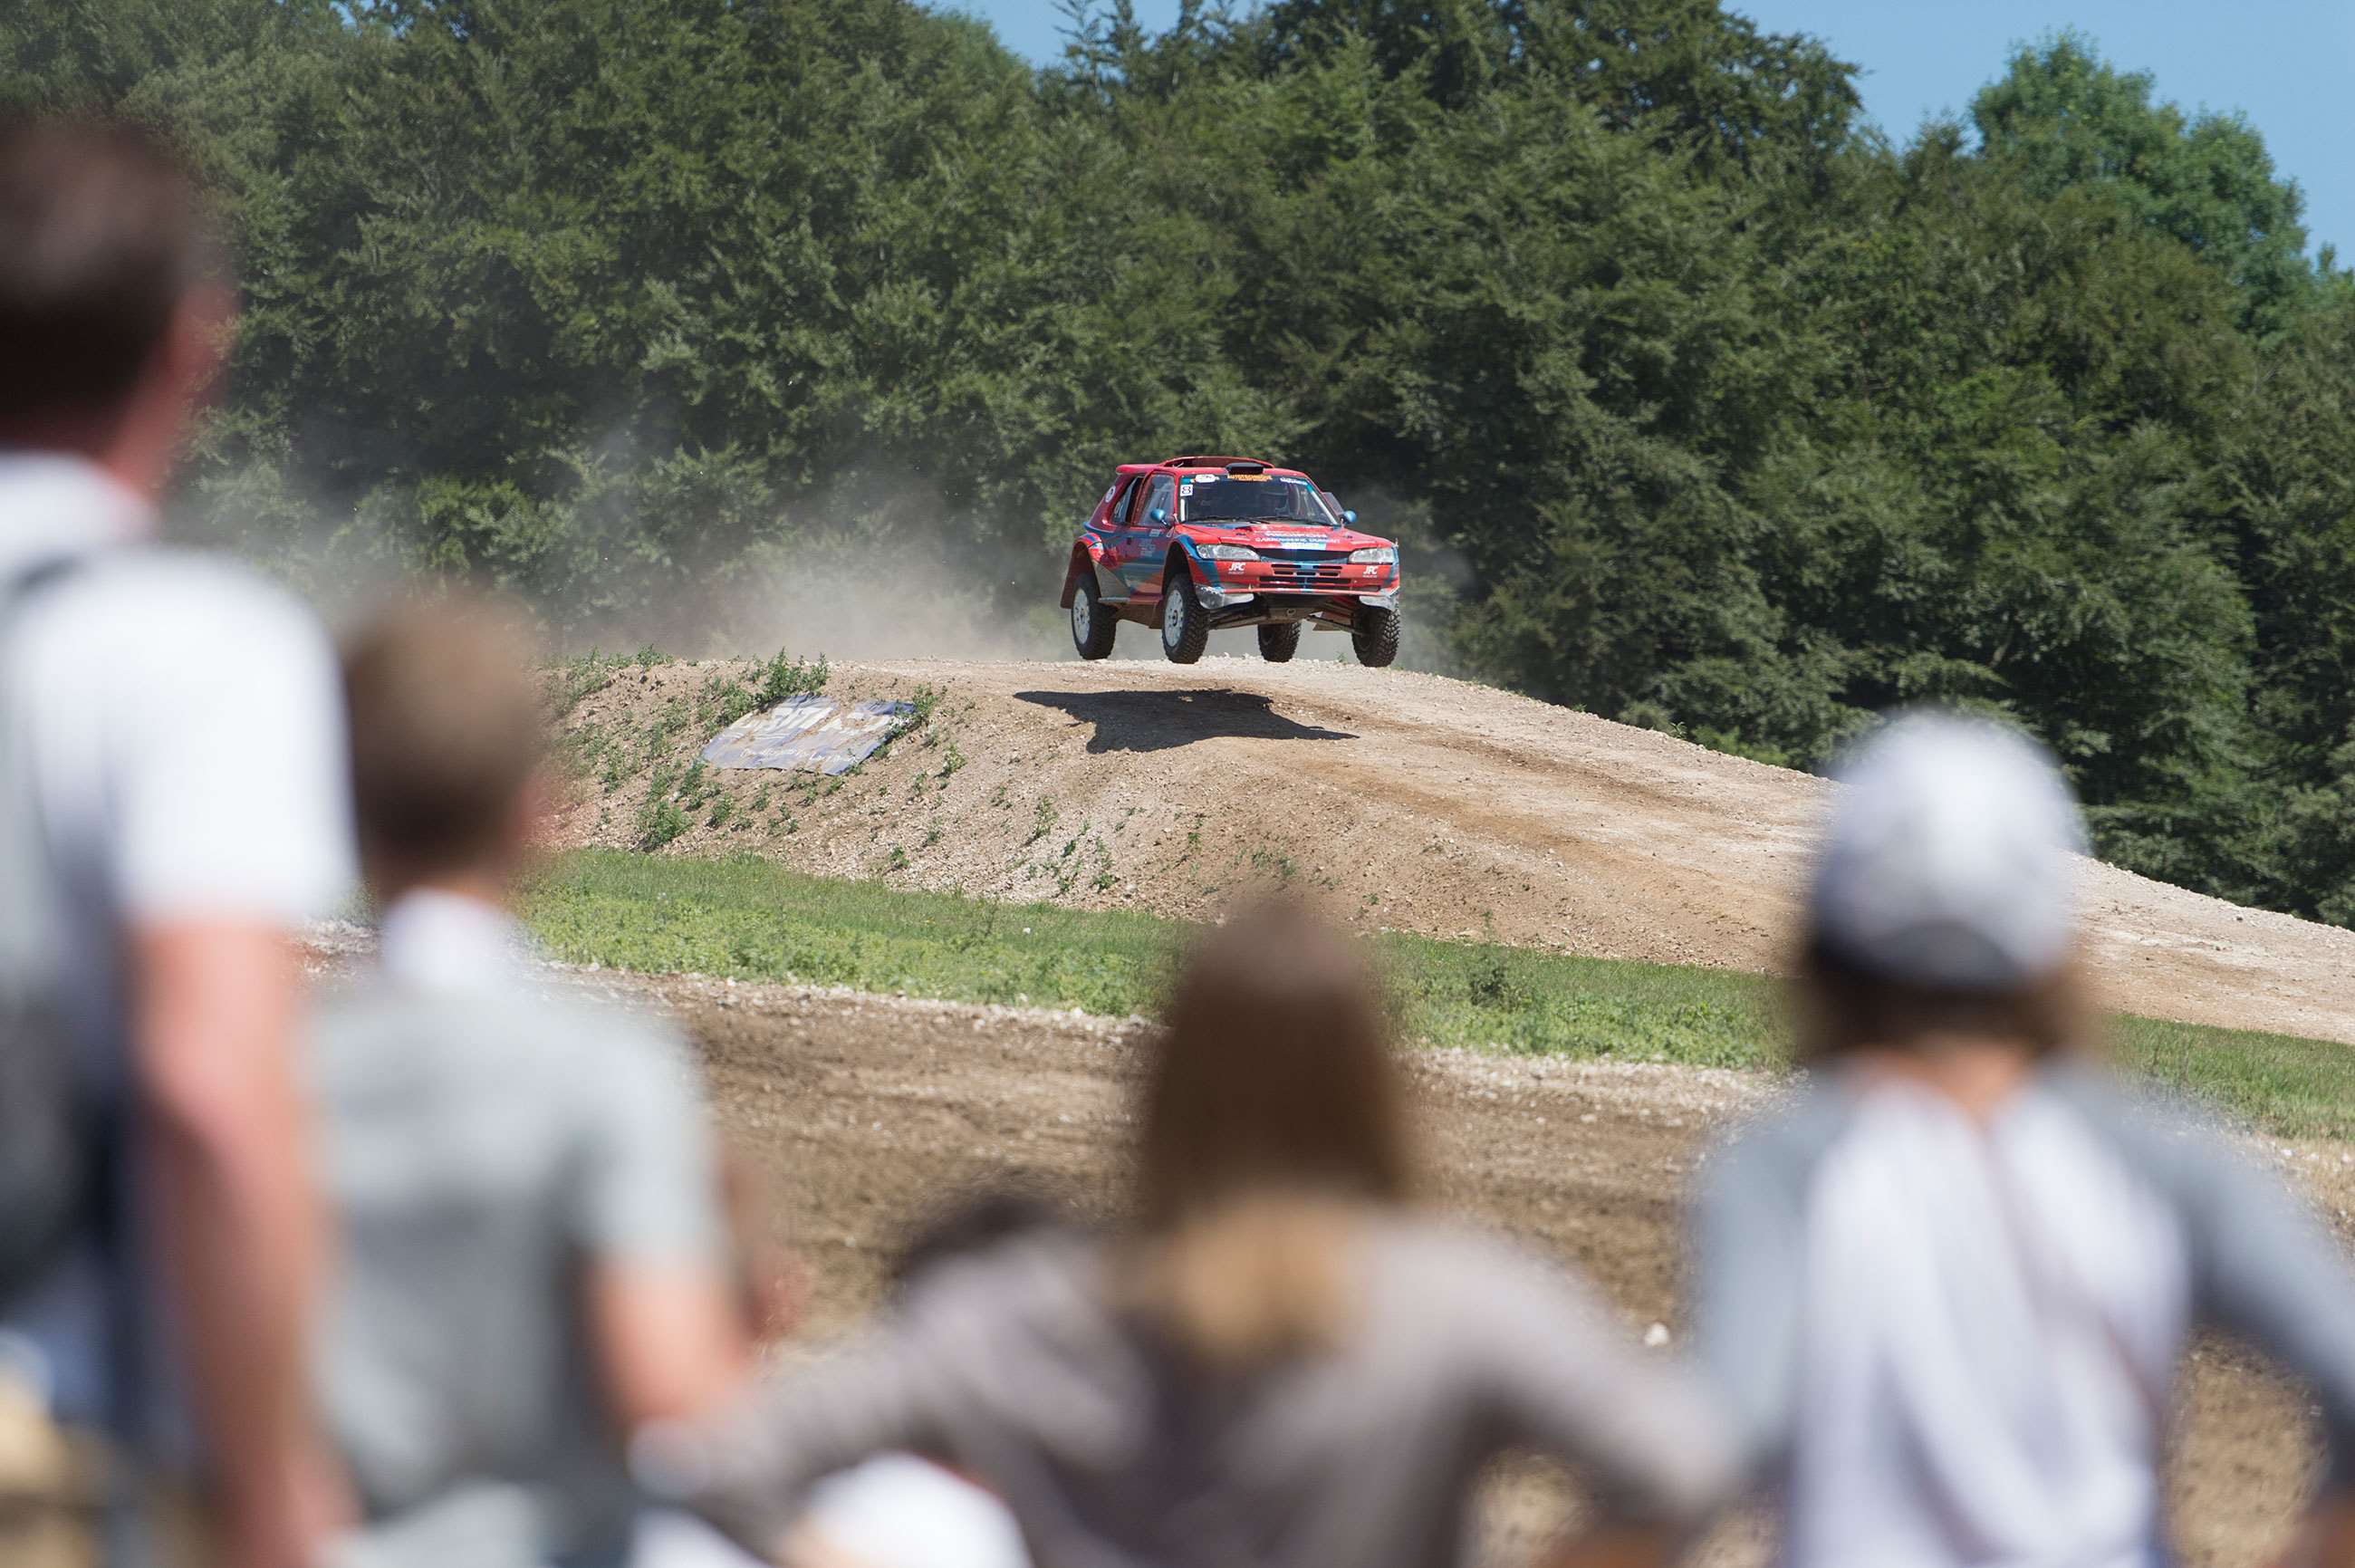 where-to-stand-at-the-festival-of-speed-off-road-arena-matt-sills-fos-2017-goodwood-30062021.jpg